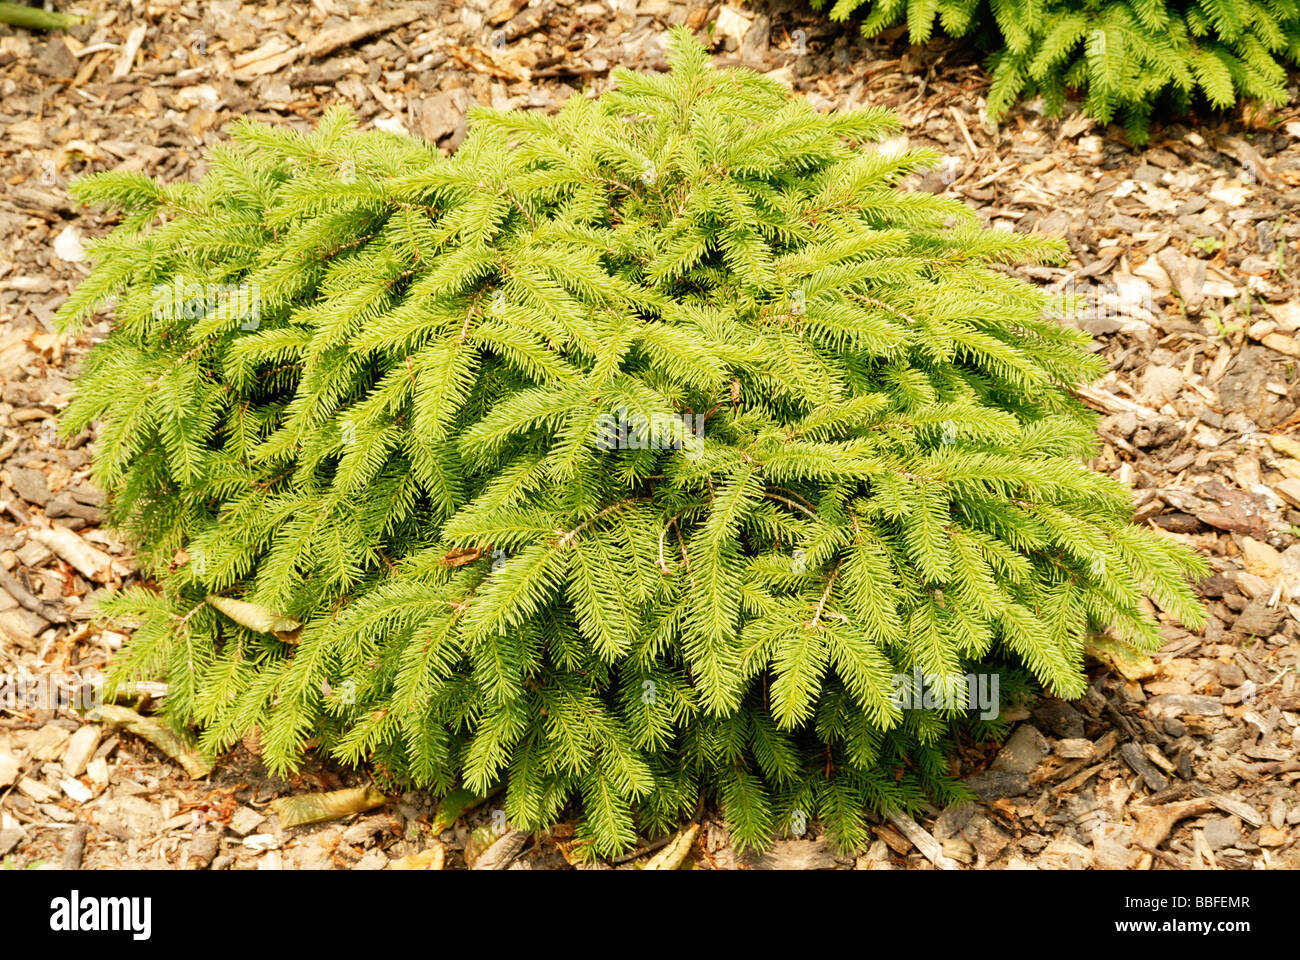 evergreen shrubs with a pine scent Stock Photo